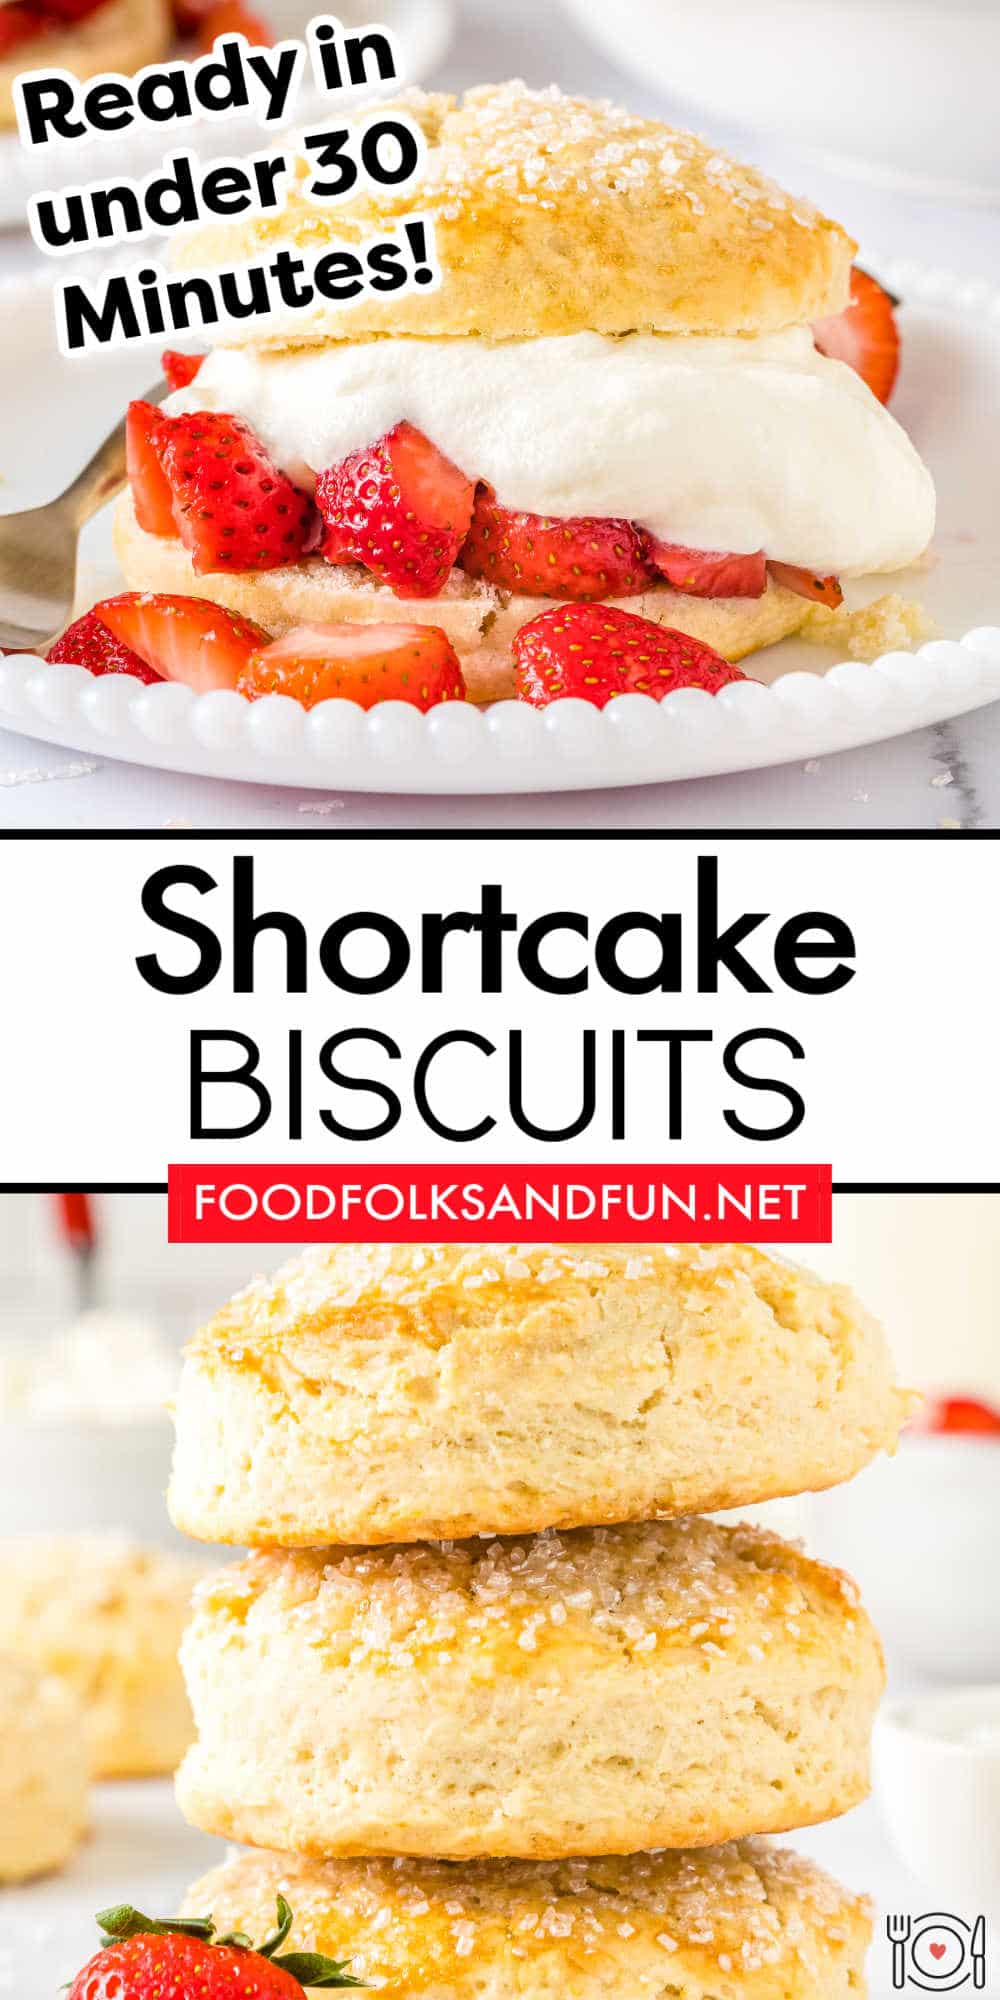 This shortcake biscuit recipe makes the perfect vessel for berry shortcakes. The best part is they are made, start to finish, in just 20 minutes. via @foodfolksandfun